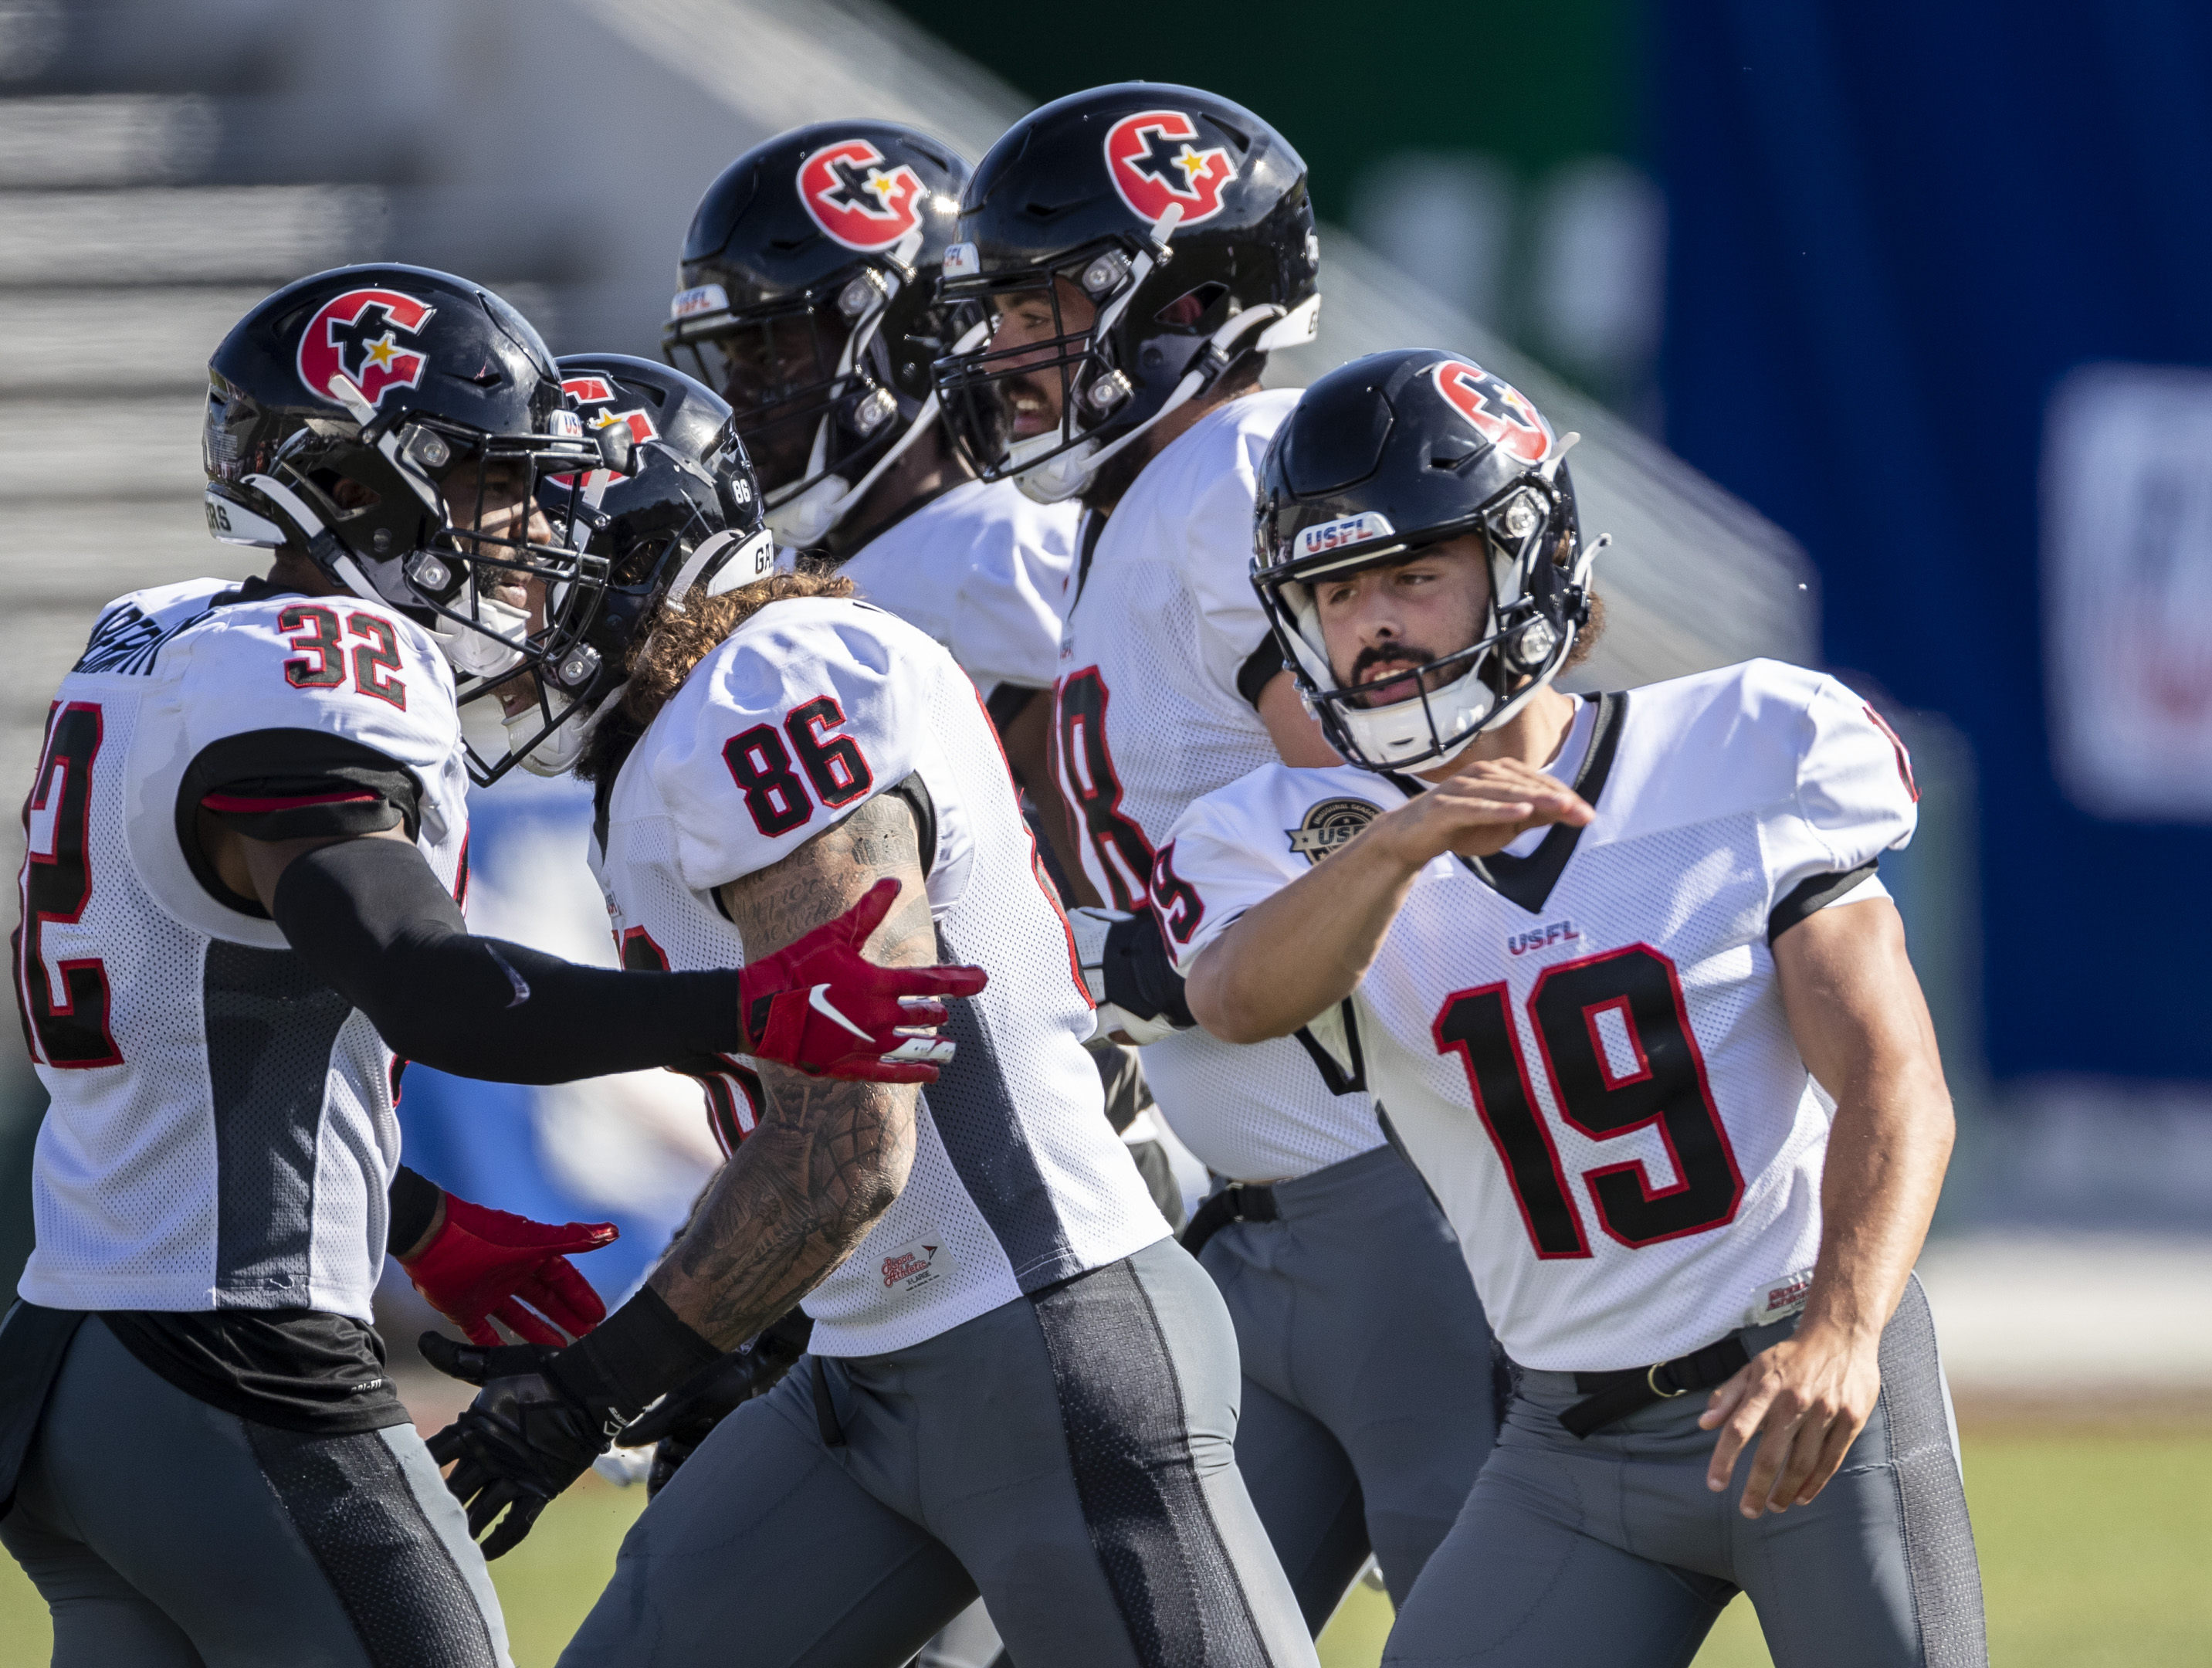 Watch Houston Gamblers vs New Orleans Breakers Stream USFL live - How to Watch and Stream Major League and College Sports